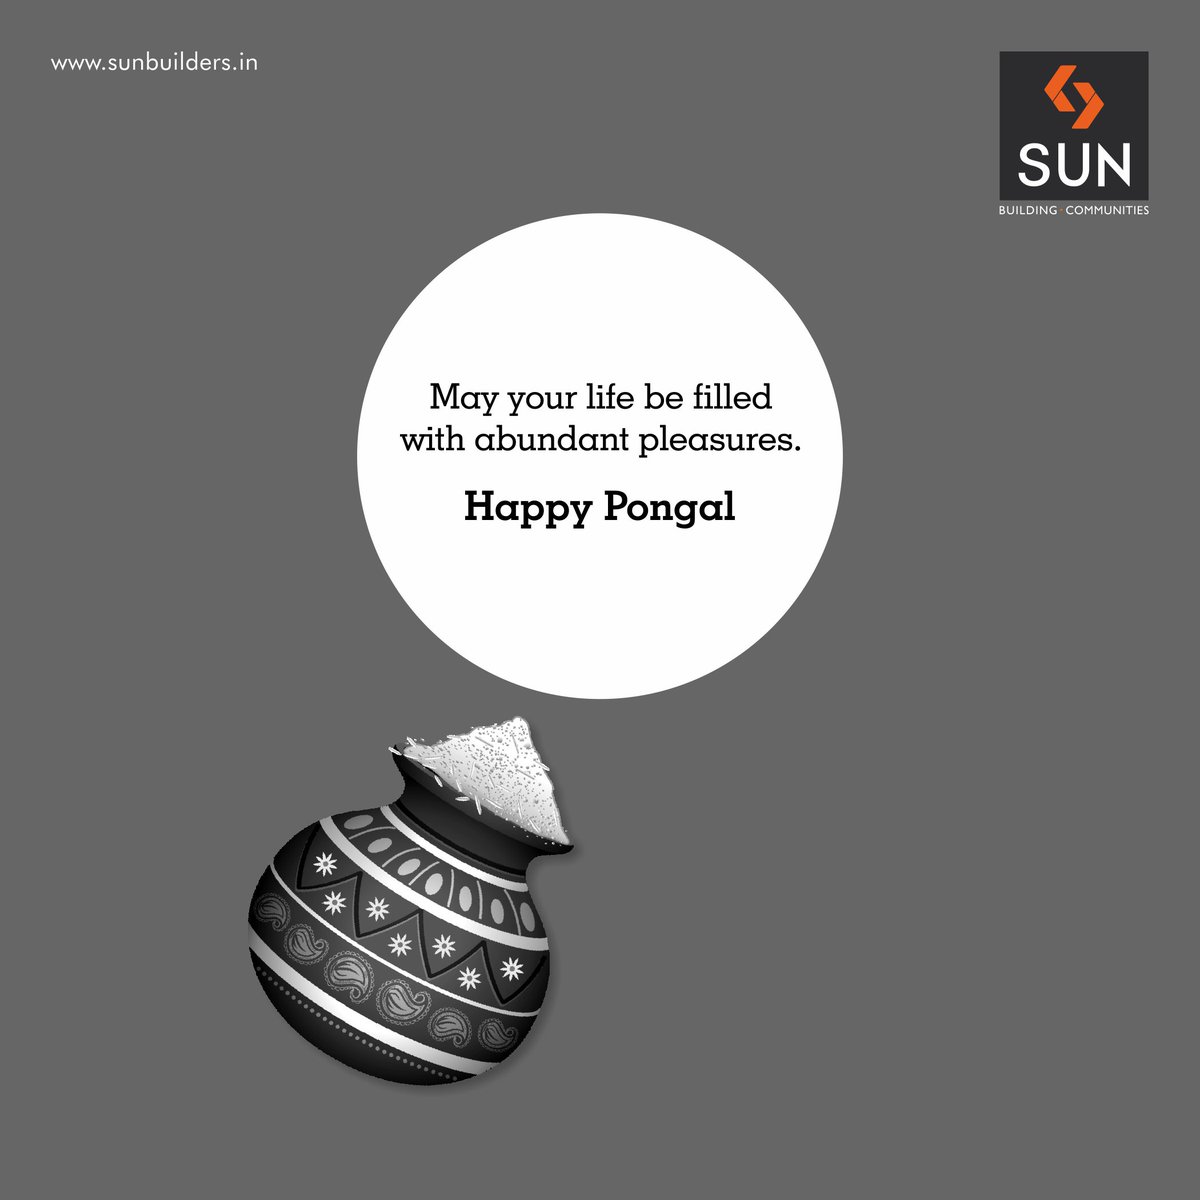 Wishing you all a very Happy Pongal! :) https://t.co/zbr5EmxnsS